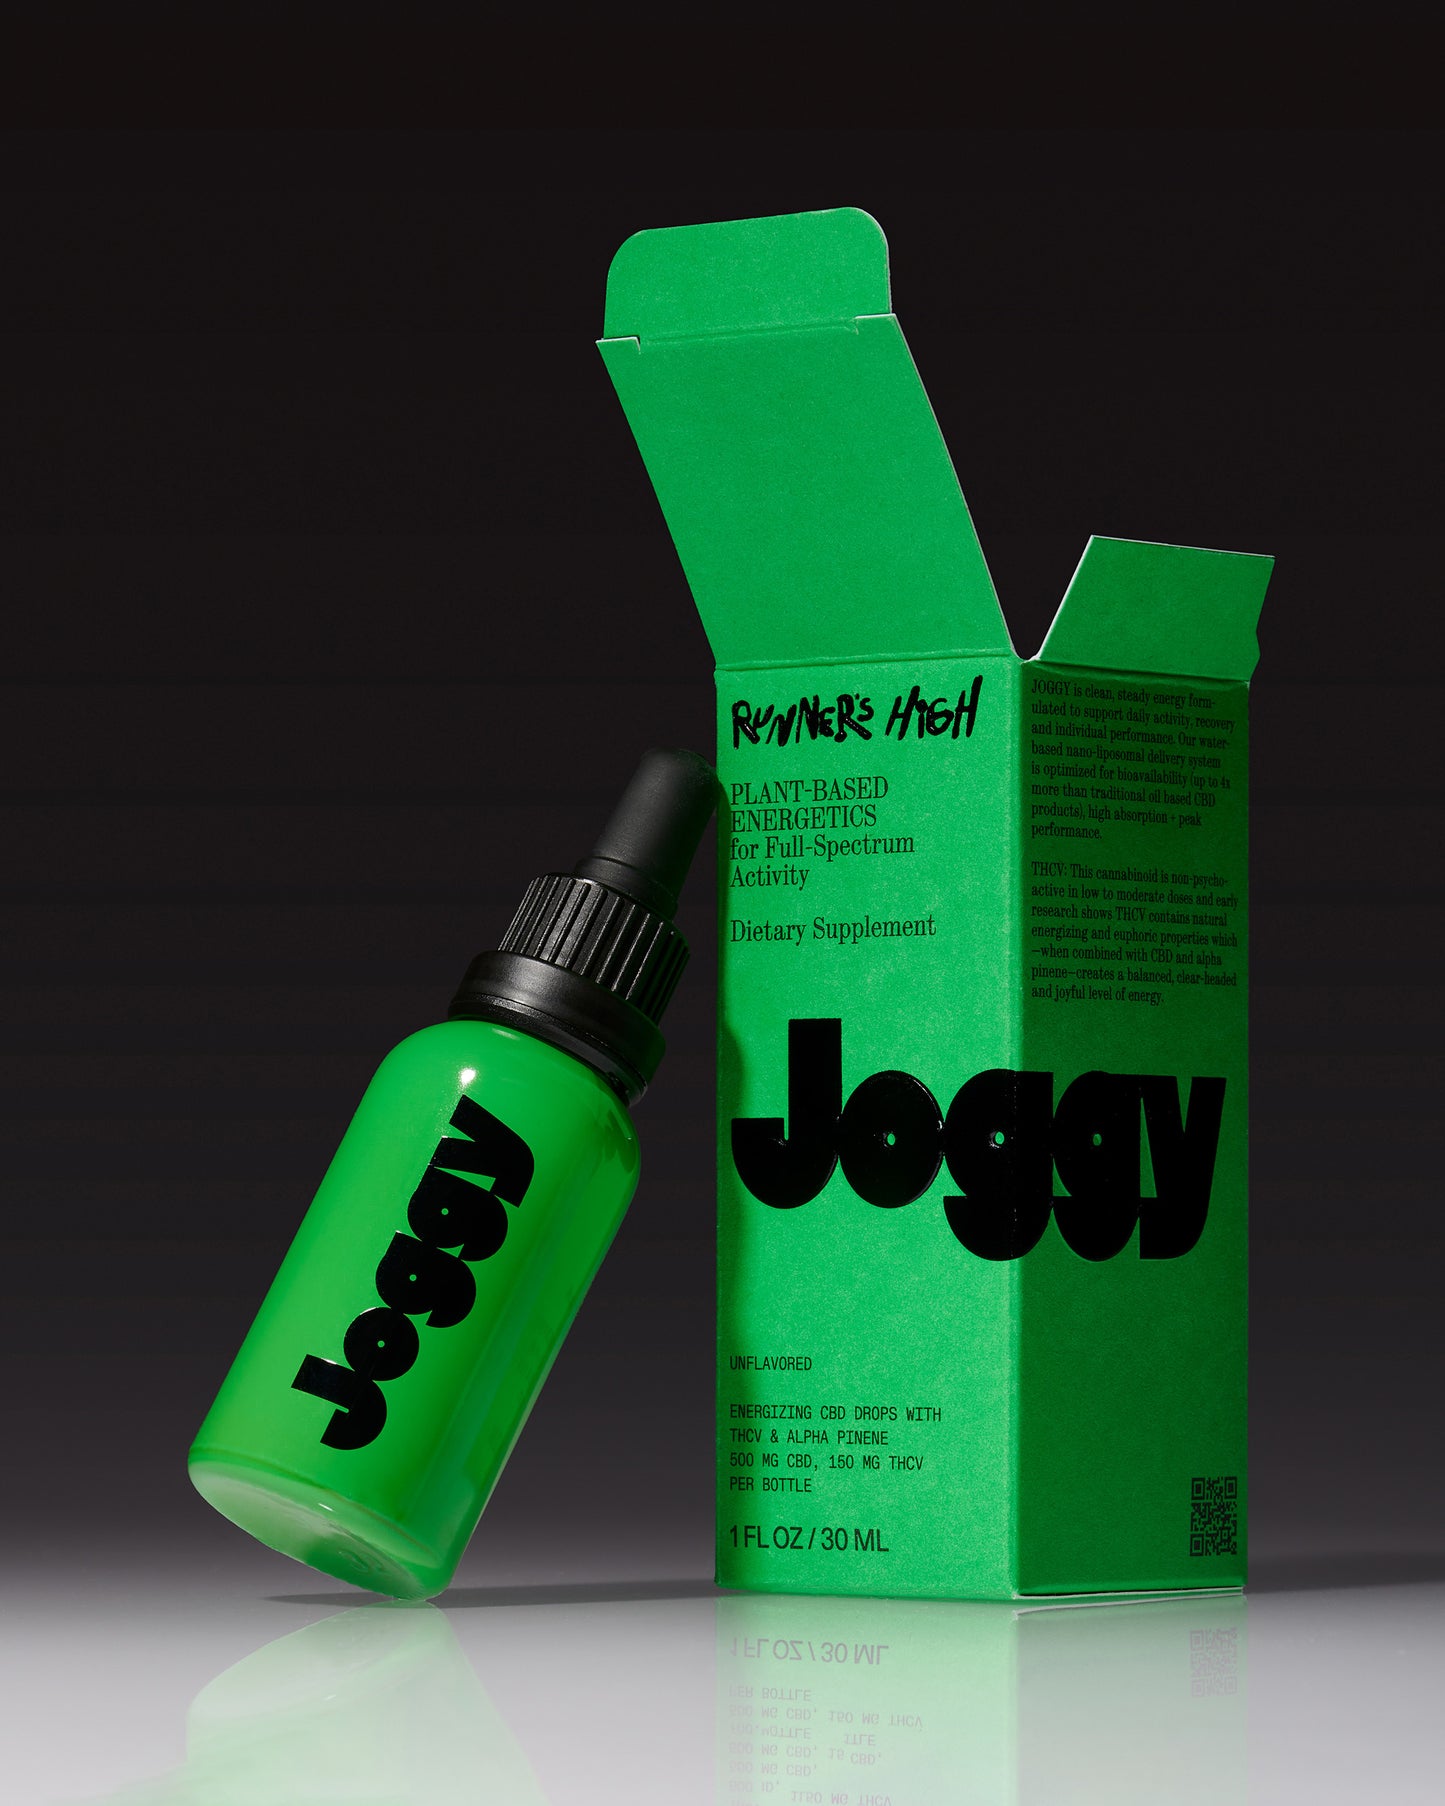 Ready Steady | Joggy | Energizing Drops | Green bottle with green box